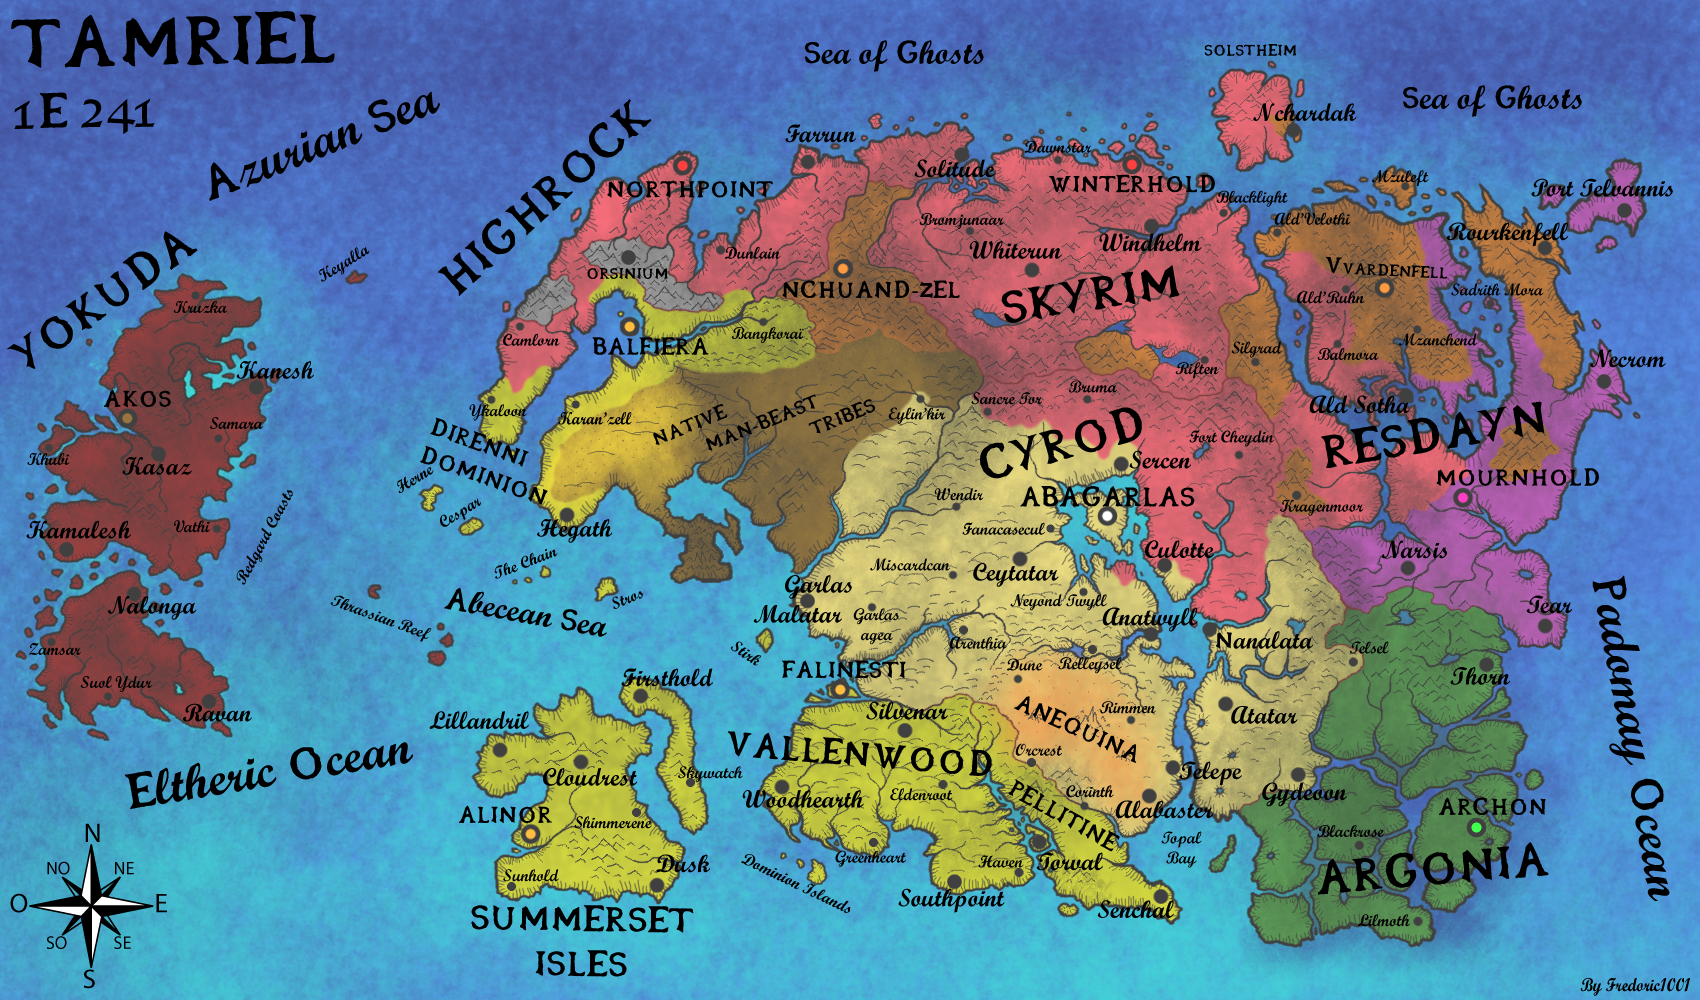 geopolitical_map_of_tamriel_in_1e241_by_